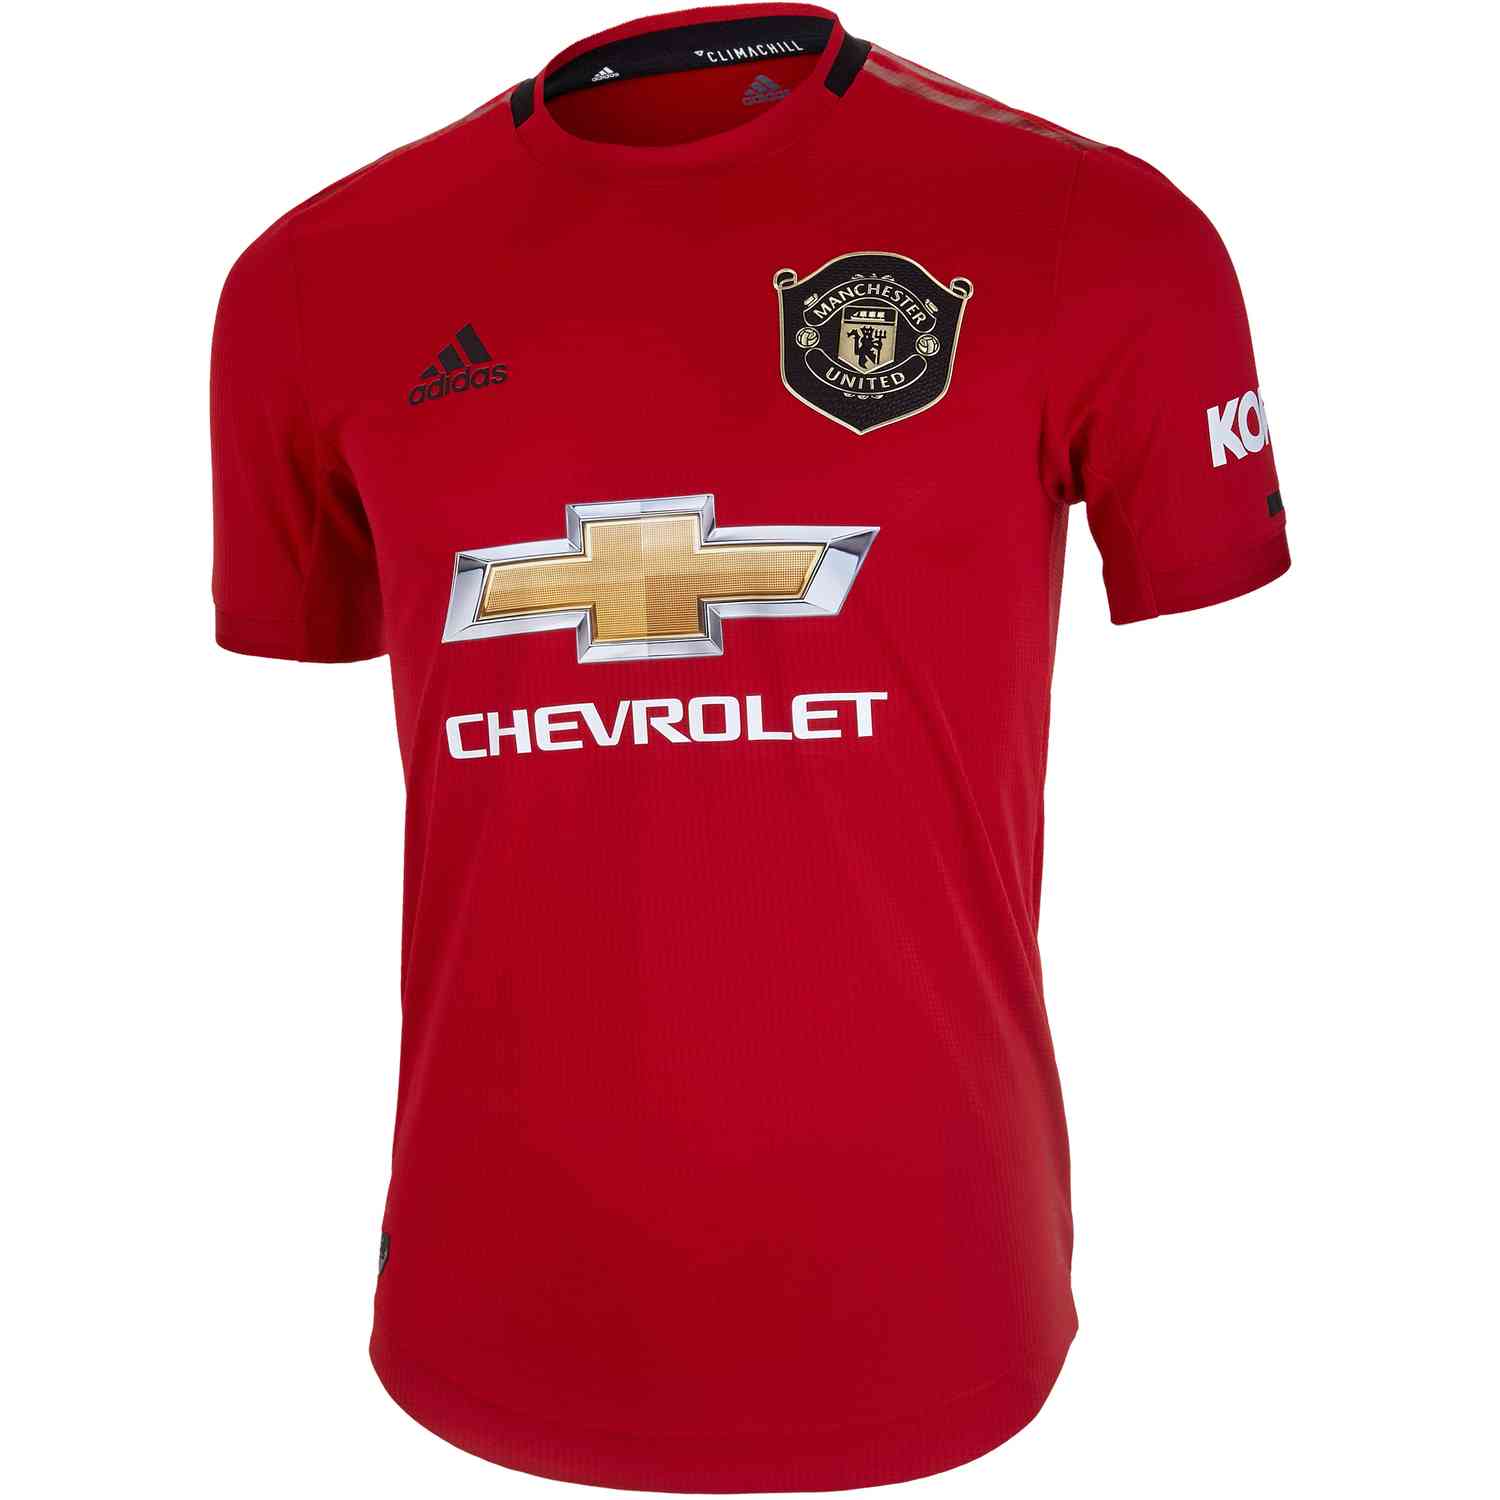 2019/20 adidas Manchester United Home Authentic Jersey - SoccerPro